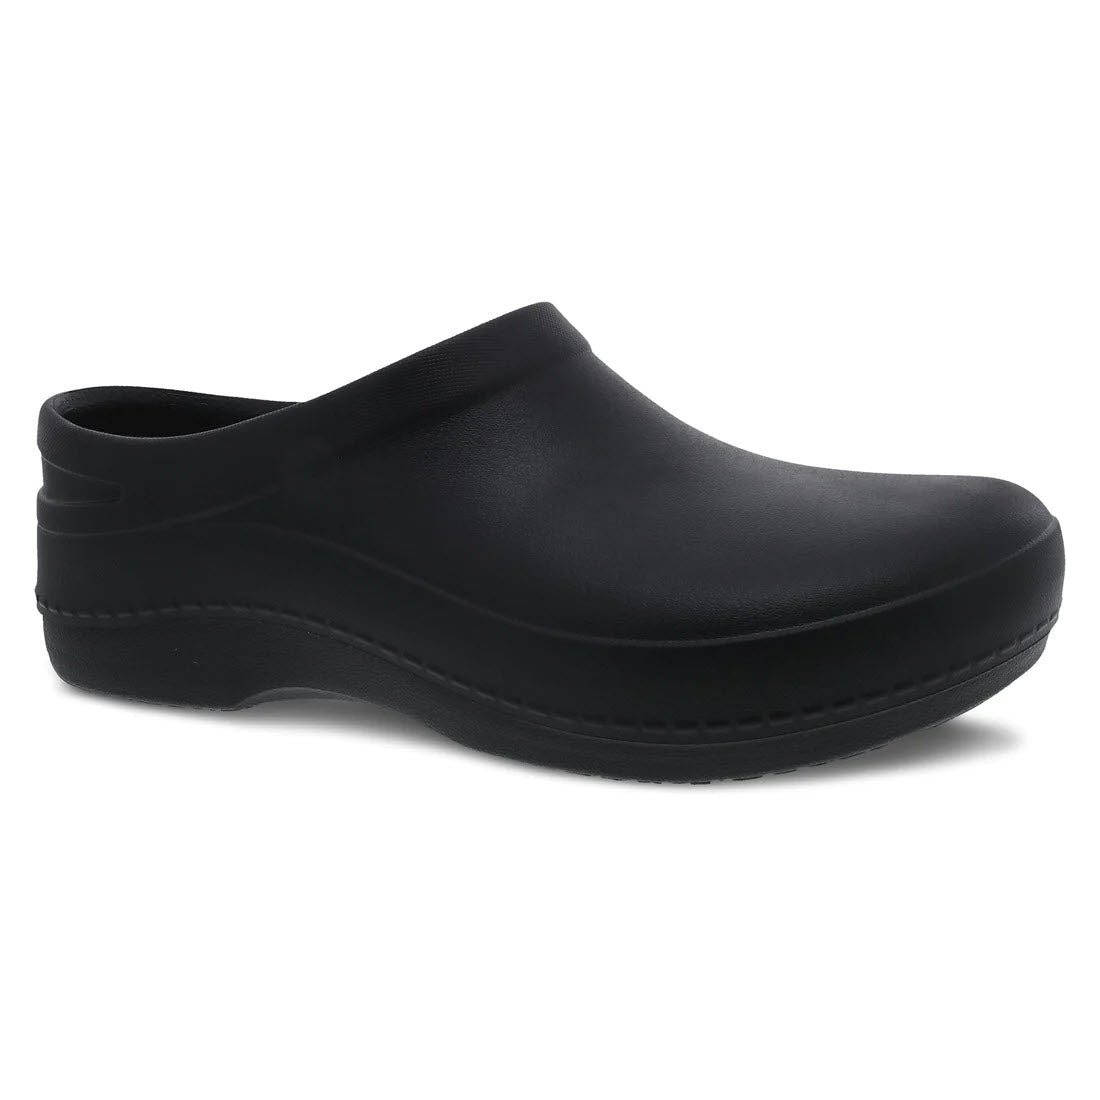 A black, slip-on clog with a smooth finish and a slightly elevated heel, featuring a slip-resistant rubber outsole, viewed from a side angle, such as the Dansko Kaci Black - Womens.